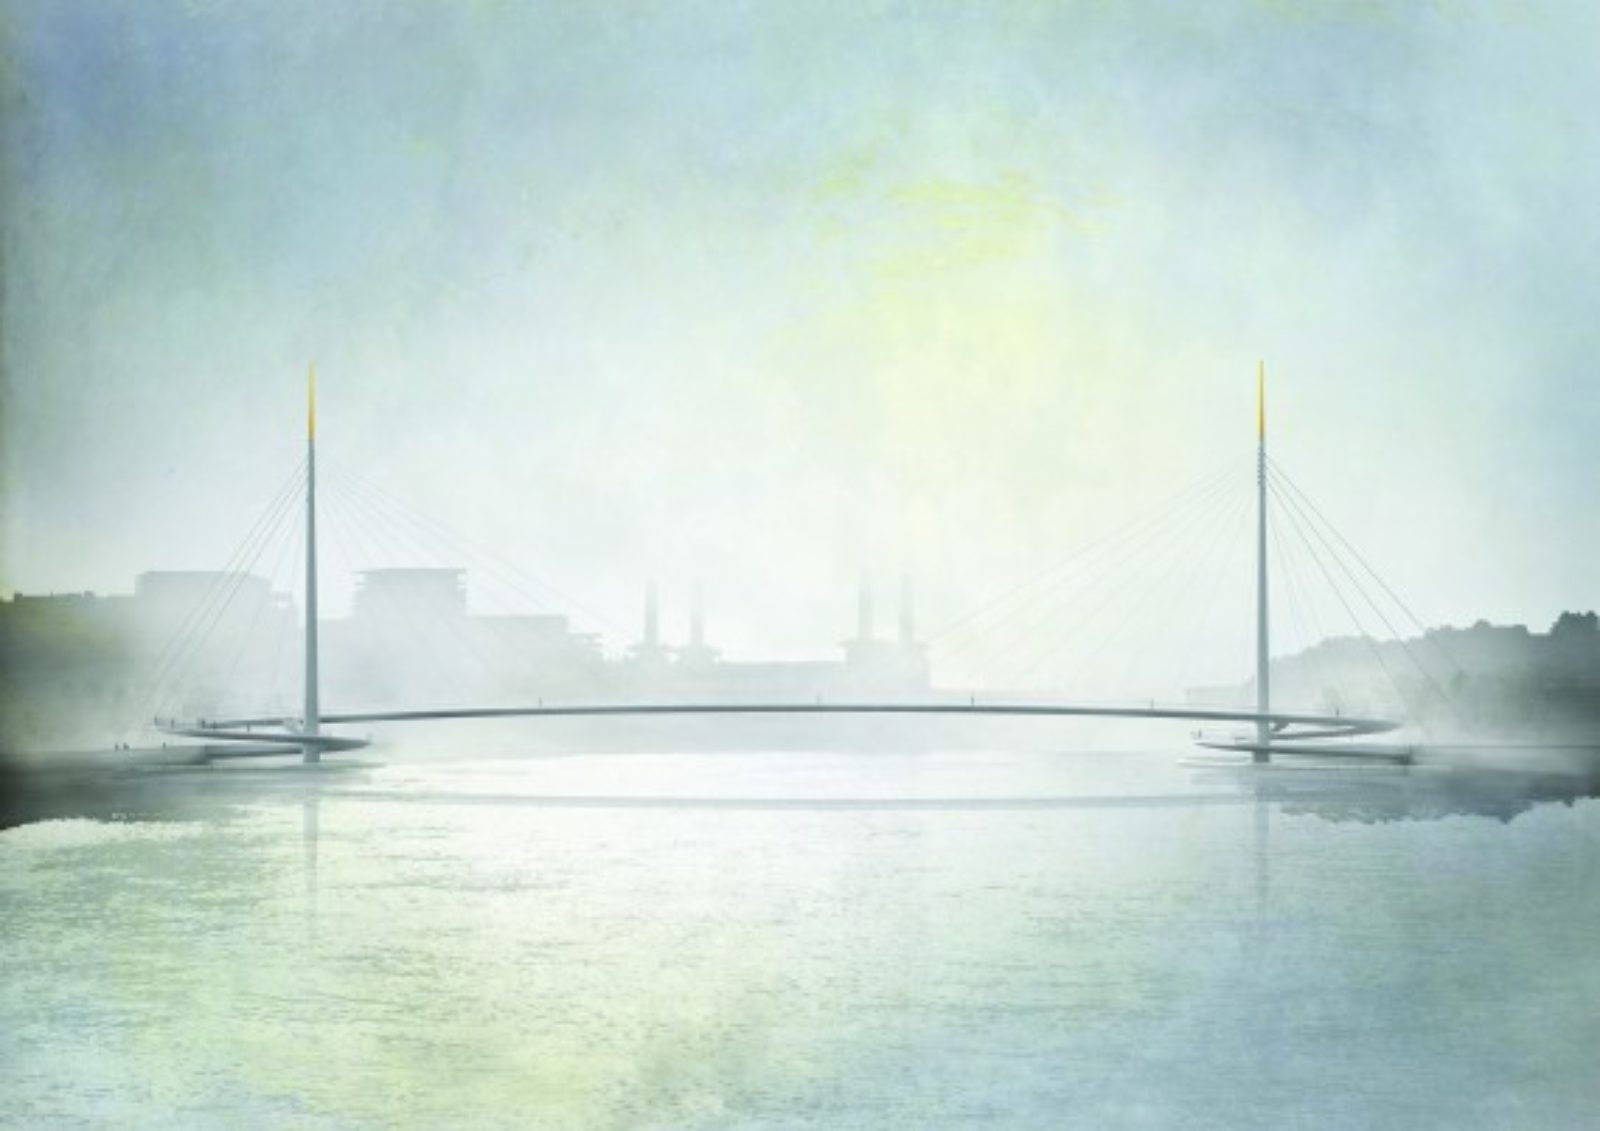 An image of a bridge over water, with a city in the background, seen through mist.